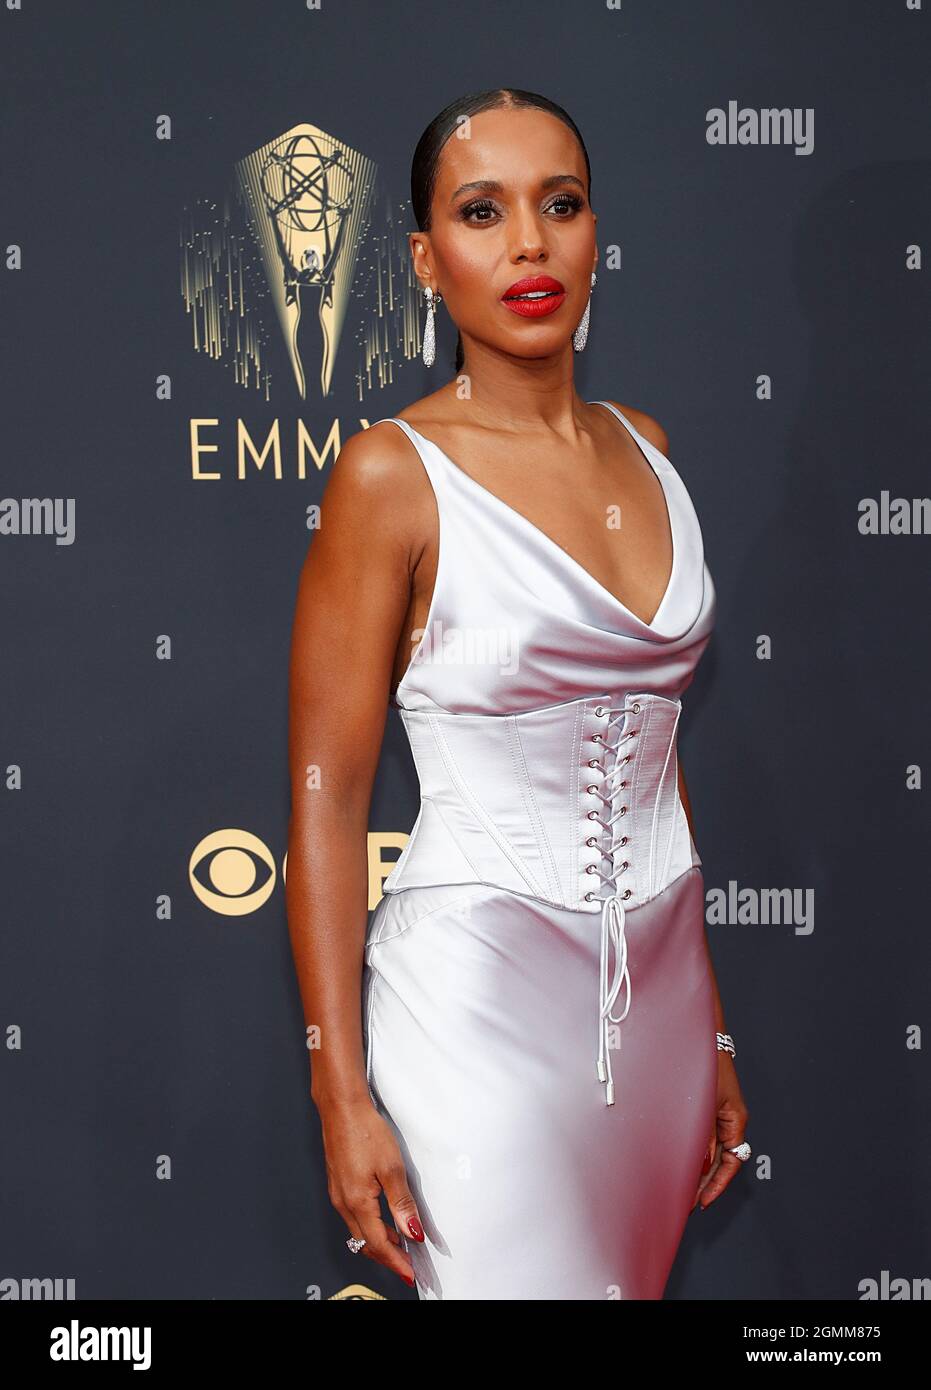 Actor Kerry Washington arrives at the 73rd Primetime Emmy Awards in Los Angeles, U.S., September 19, 2021. REUTERS/Mario Anzuoni Stock Photo